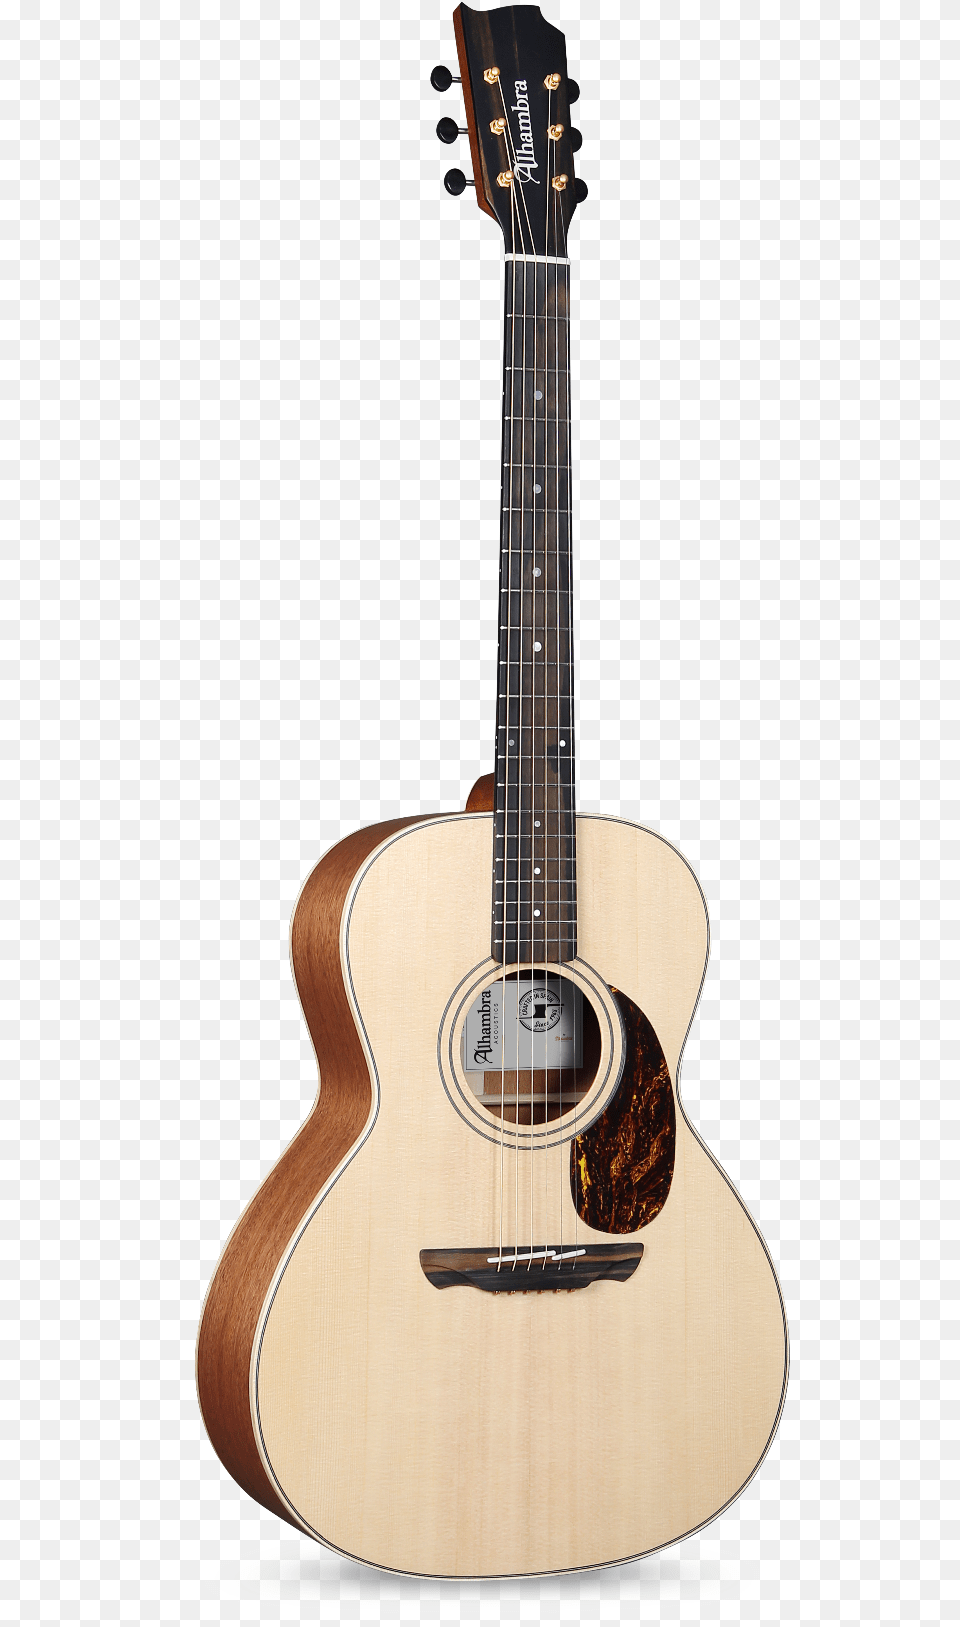 New Models Of Alhambra Acoustic Guitars Sigma Gme, Guitar, Musical Instrument, Bass Guitar Png Image